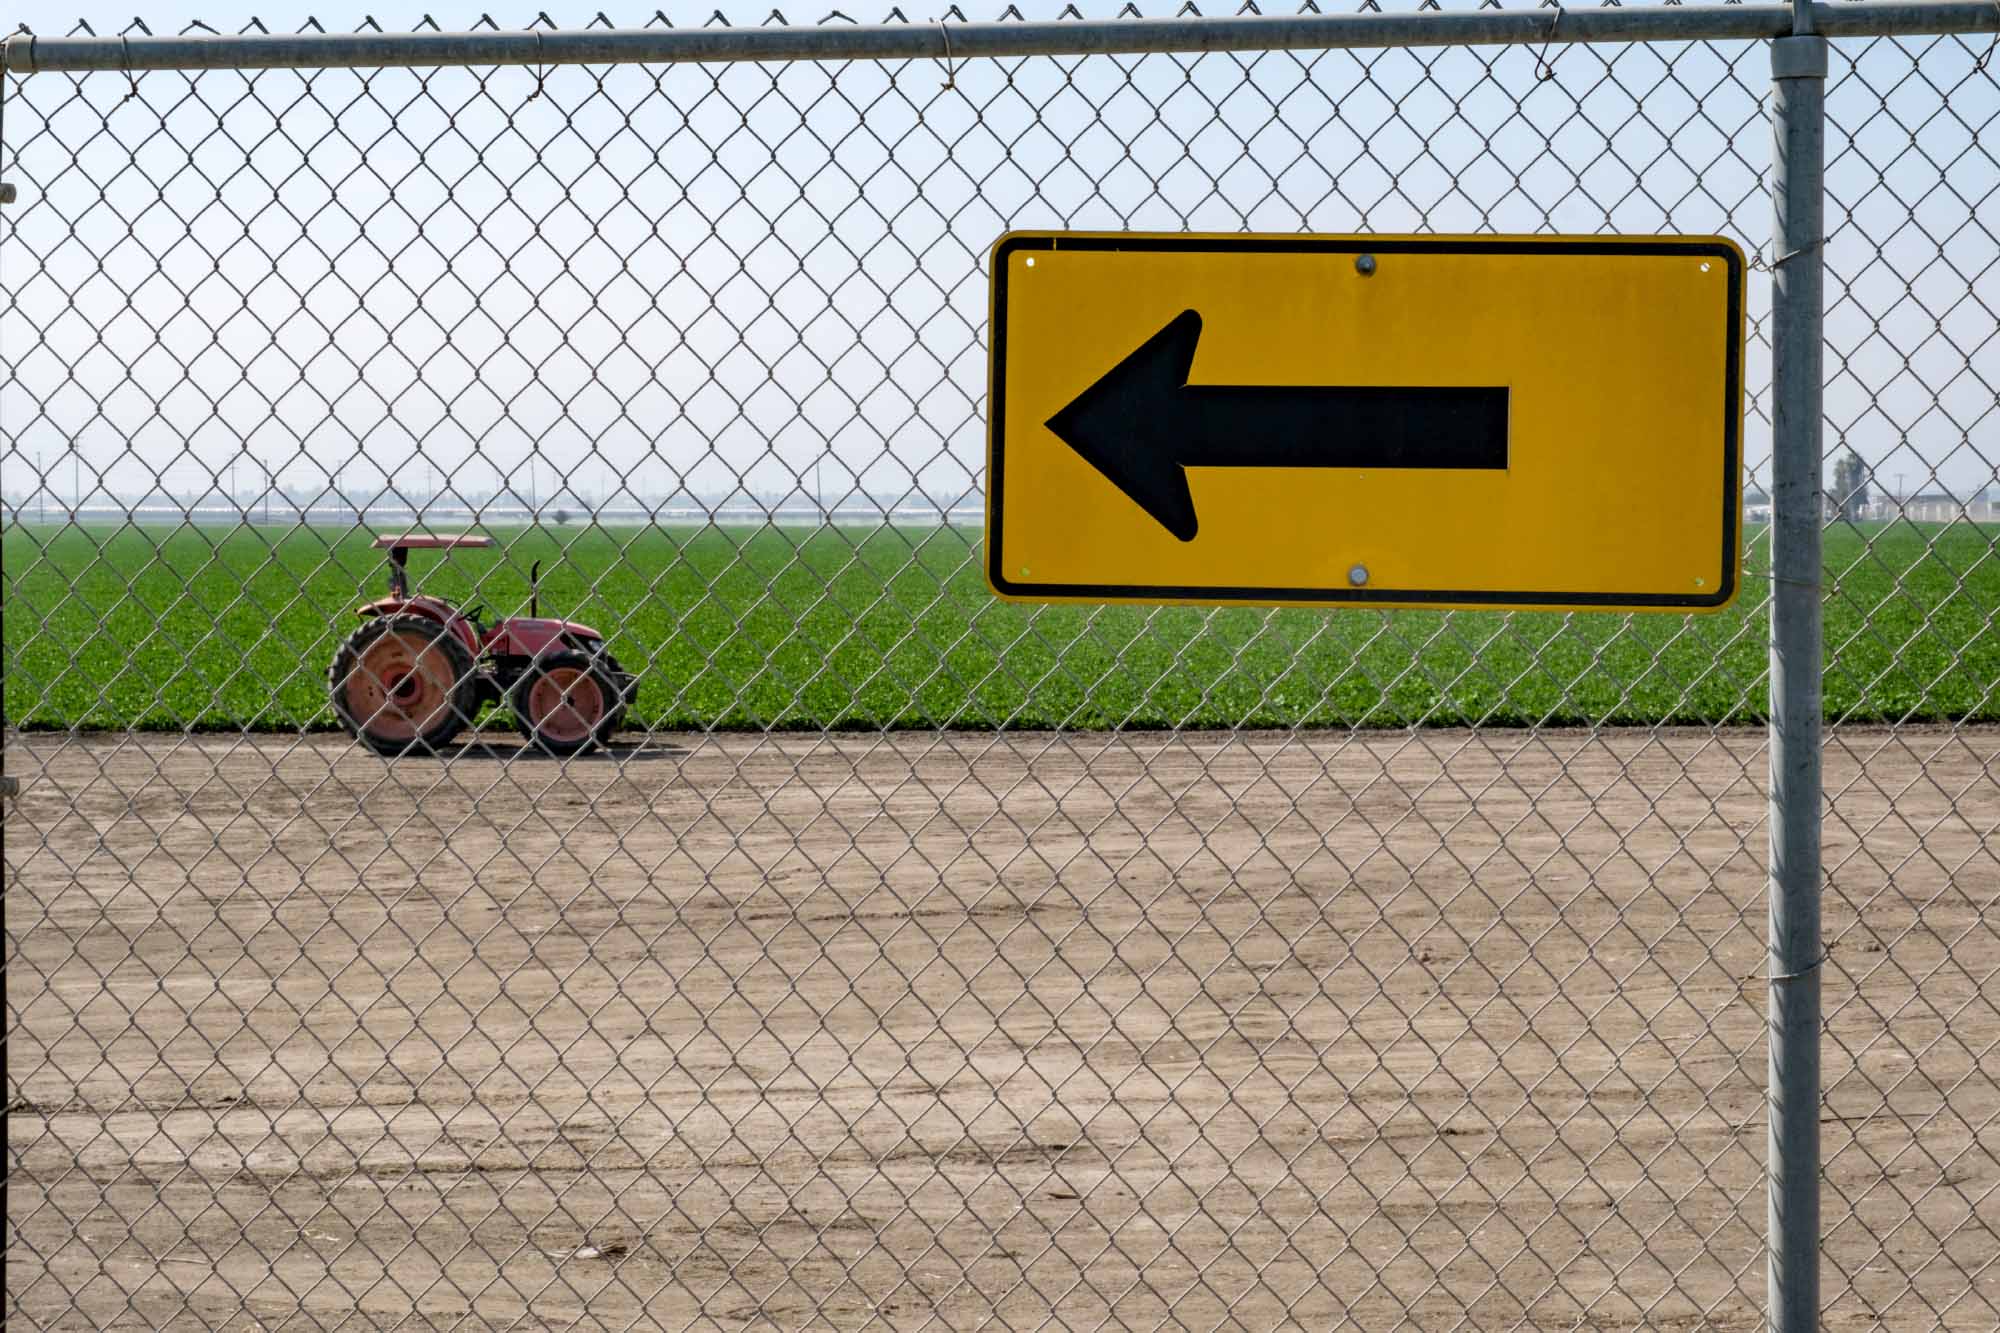 traffic sign pointing to the left hanging on a chaing-link fence, a field of crops and tractor beyond the fence